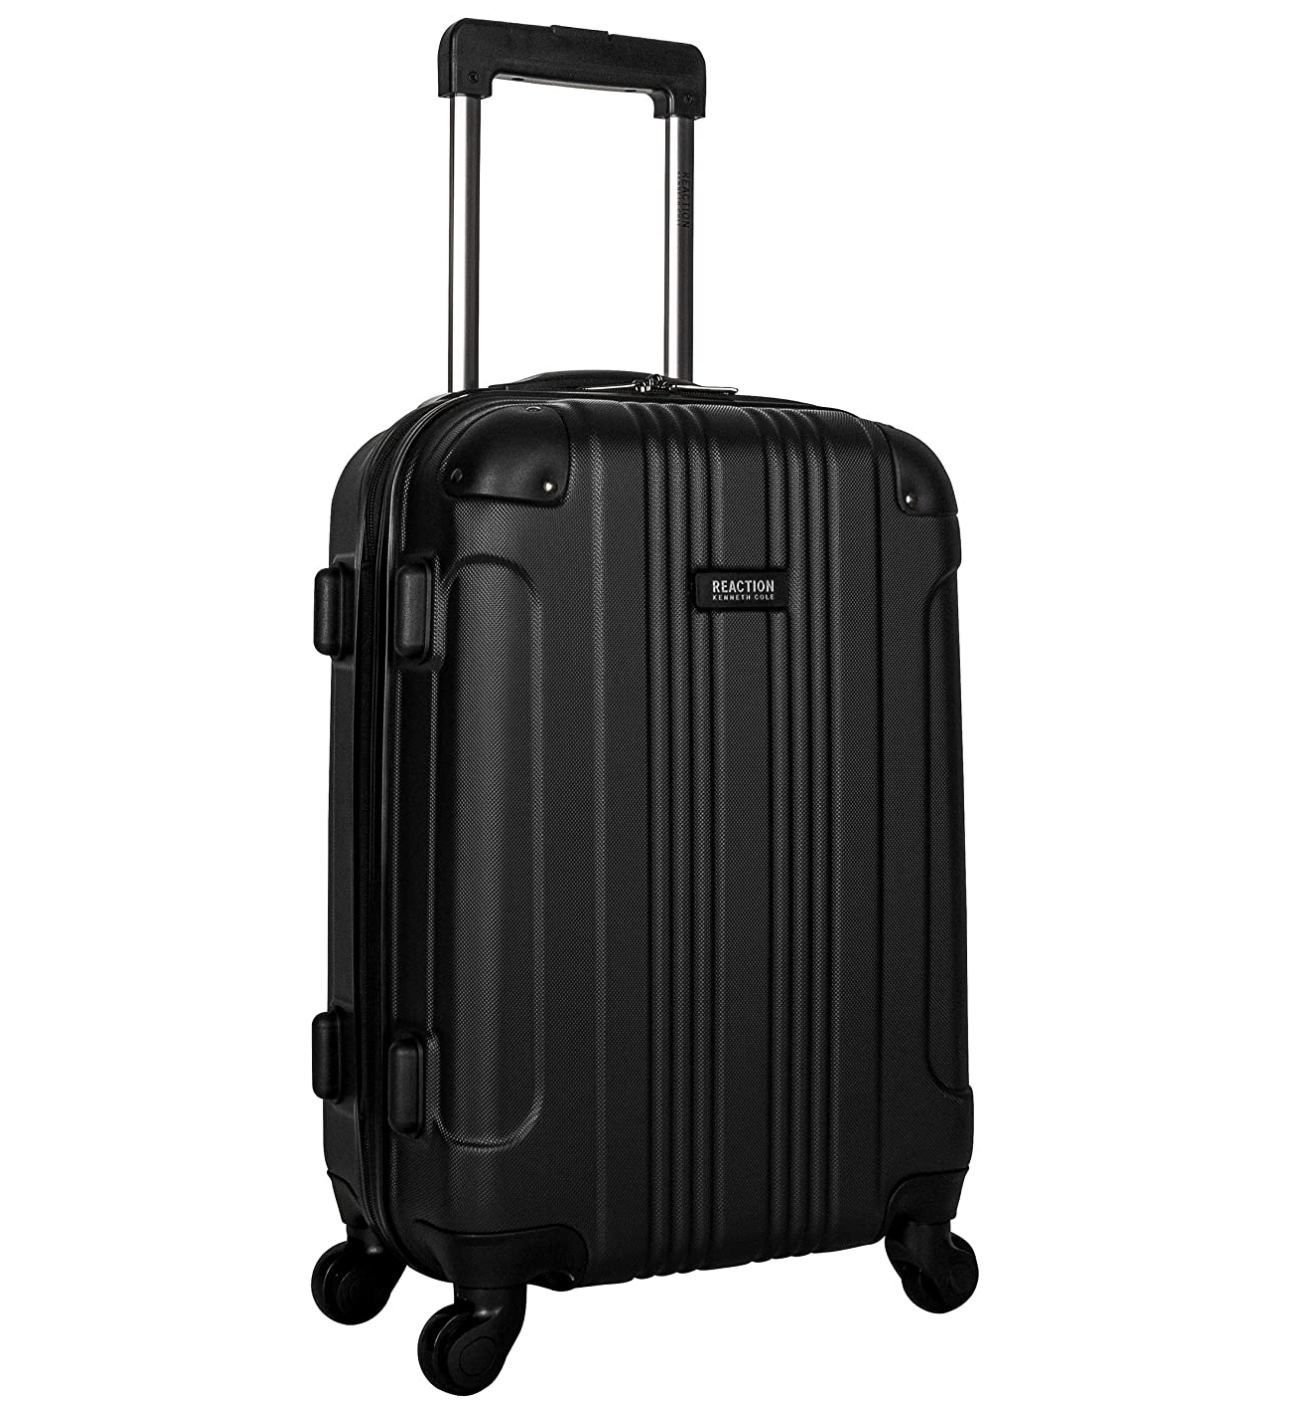 Kenneth Cole Reaction Multi-Directional Carry On Suitcase, 20-Inch